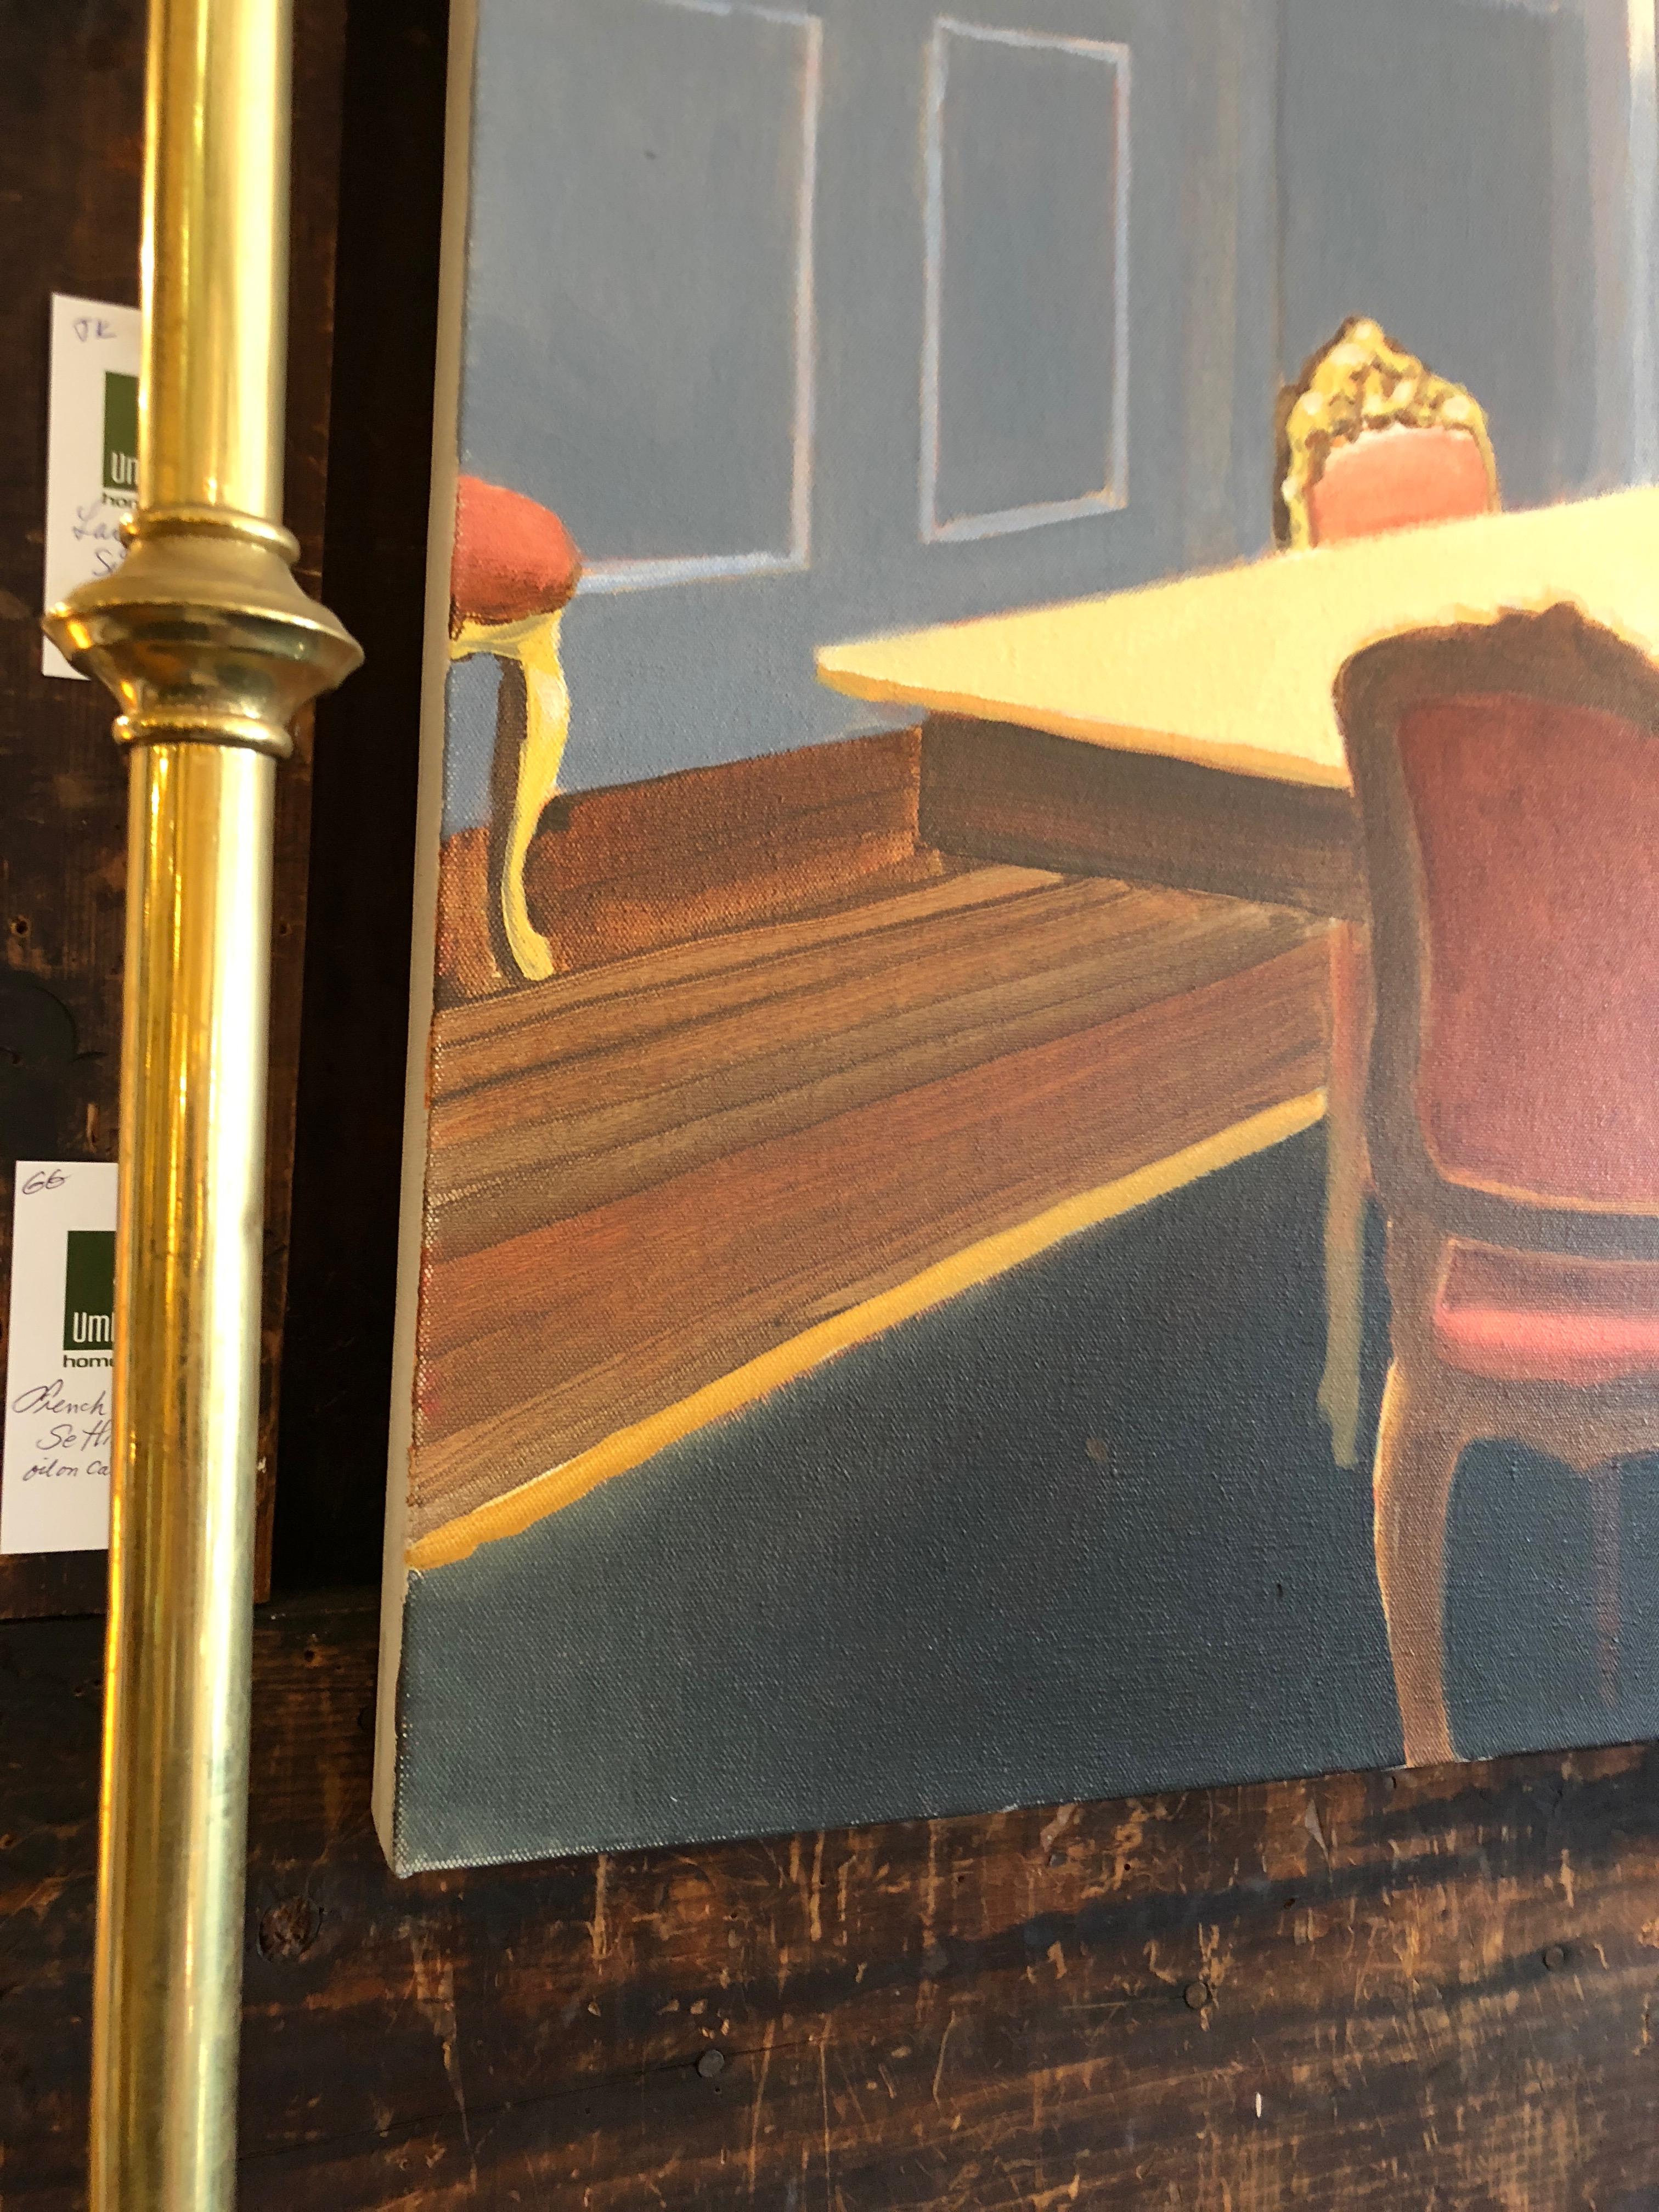 Beautifully rendered large painting on canvas by listed artist, John Bowman, having central fireplace, dining table, and unexpected single chair that's turned on it's side as if someone quickly departed the room and tipped it over. Palette is soft